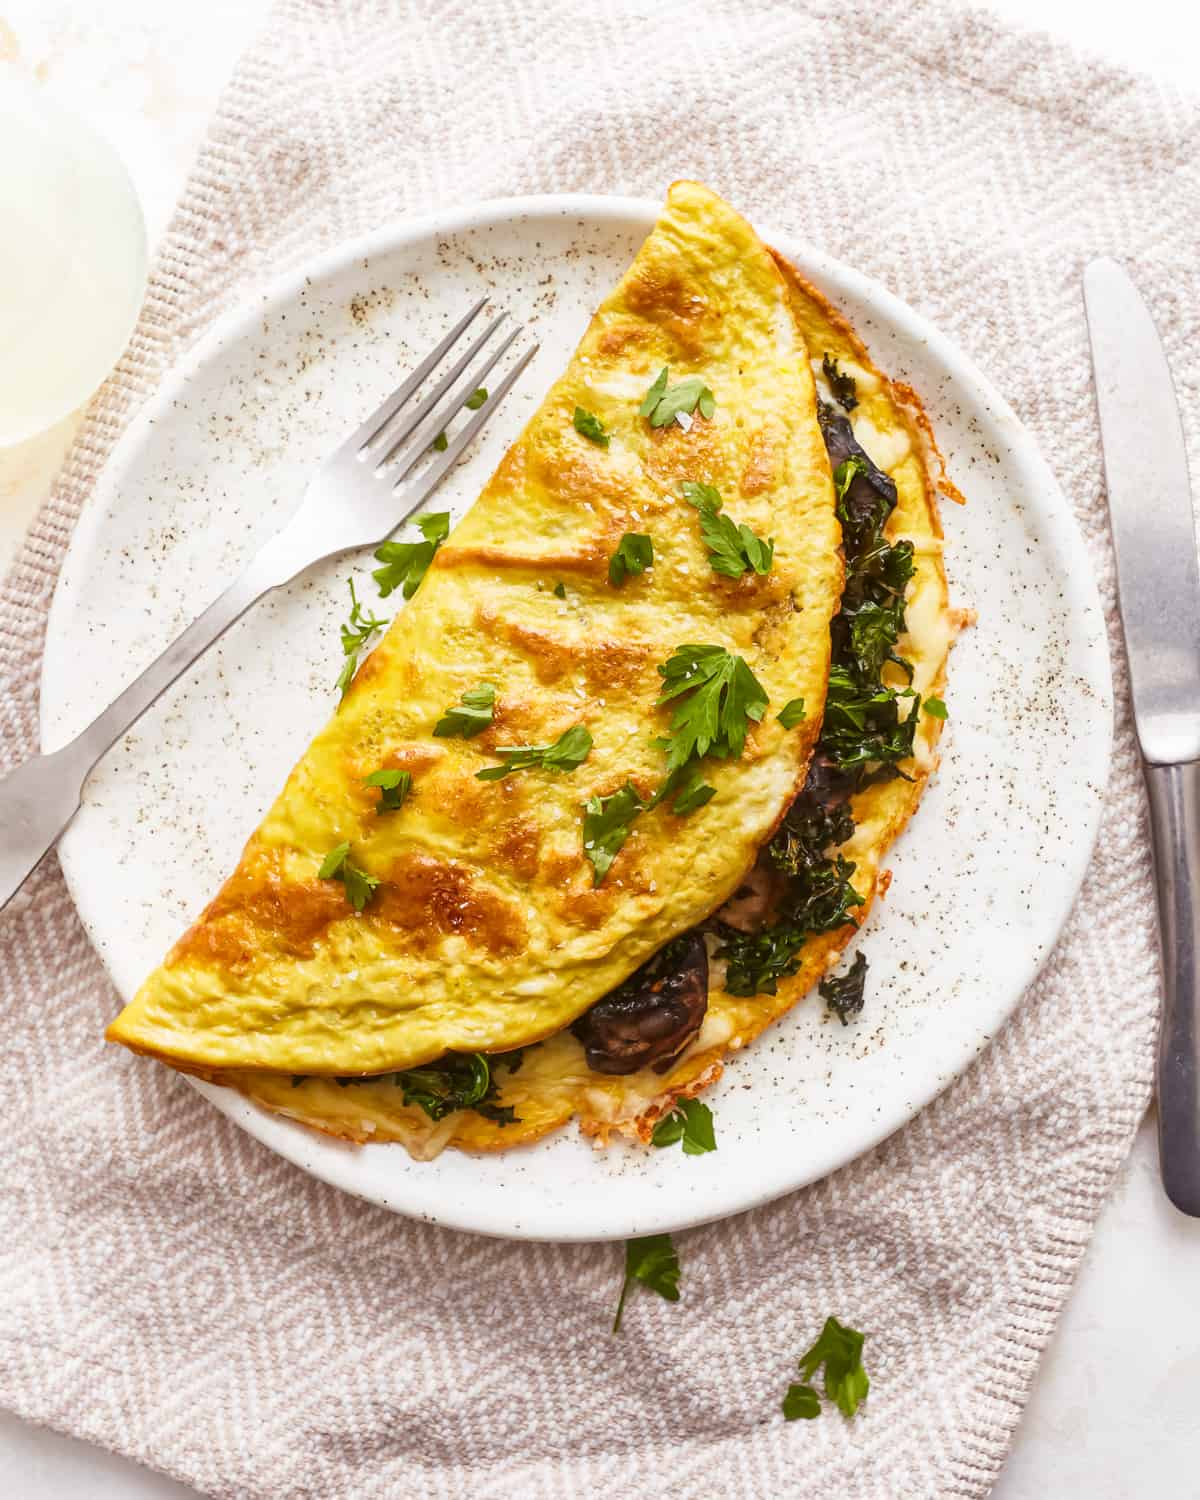 A plate with an omelet on it.